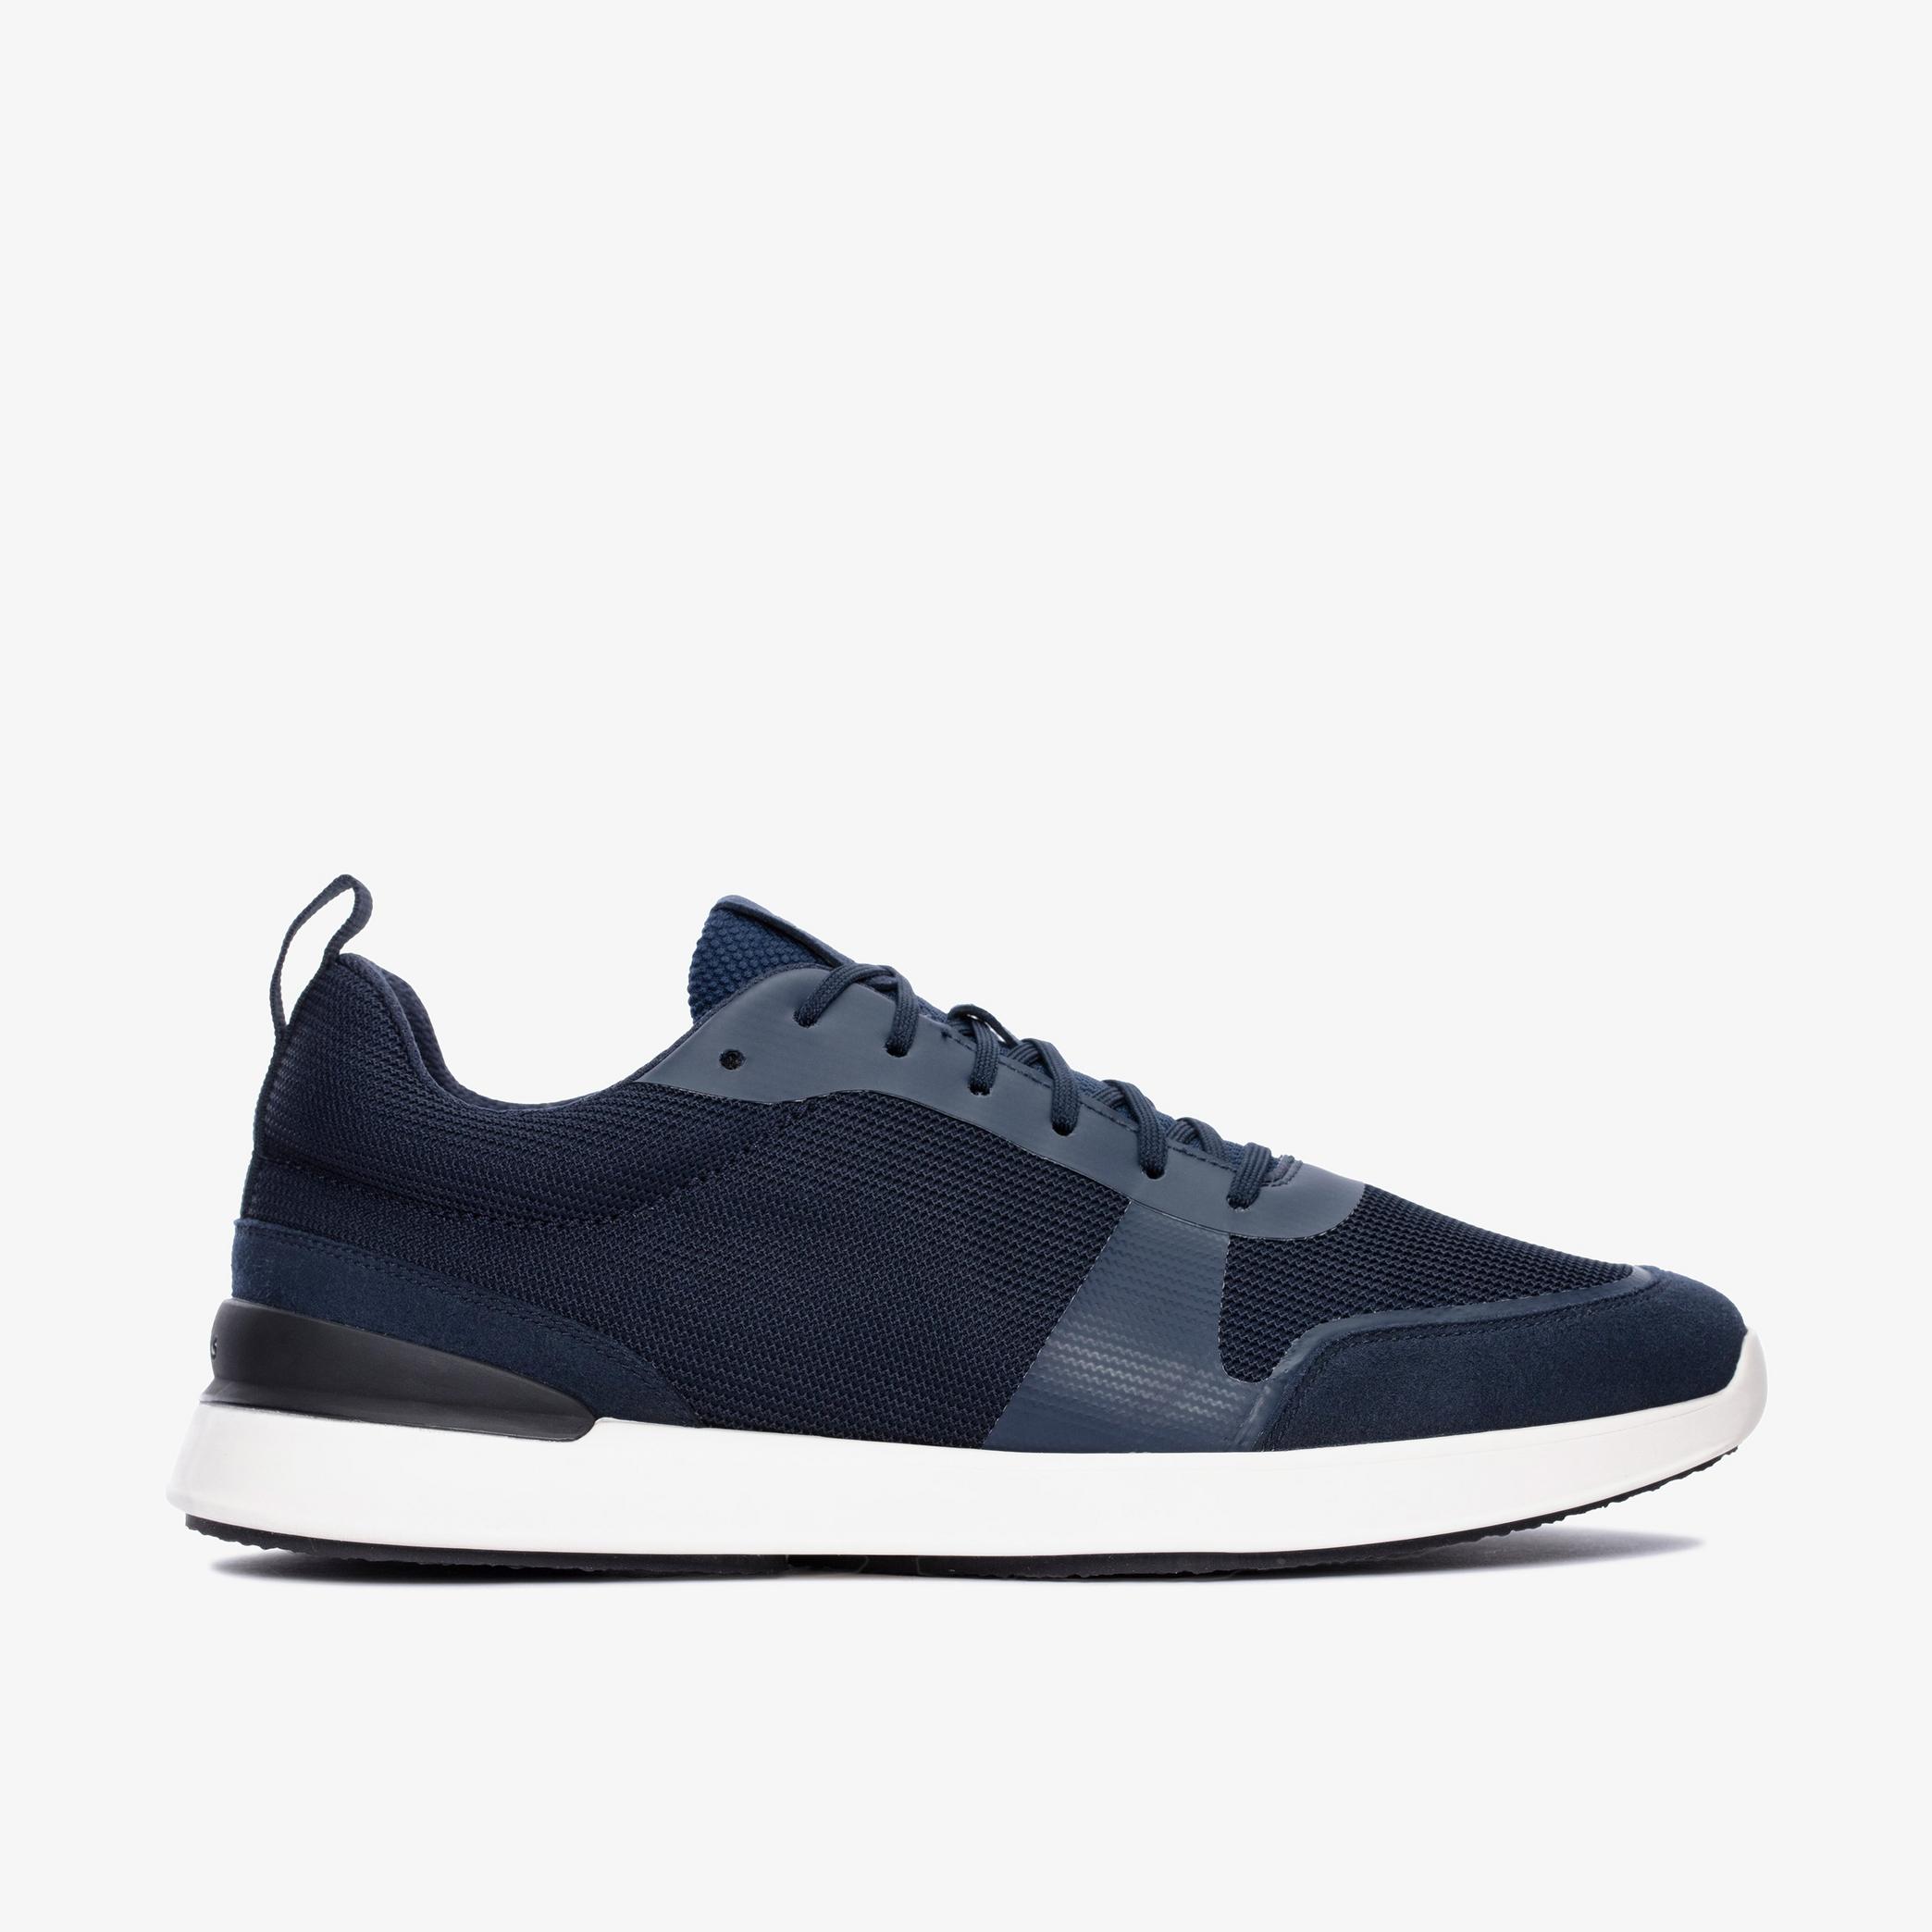 LT Lace Navy Knit Trainers, view 1 of 6